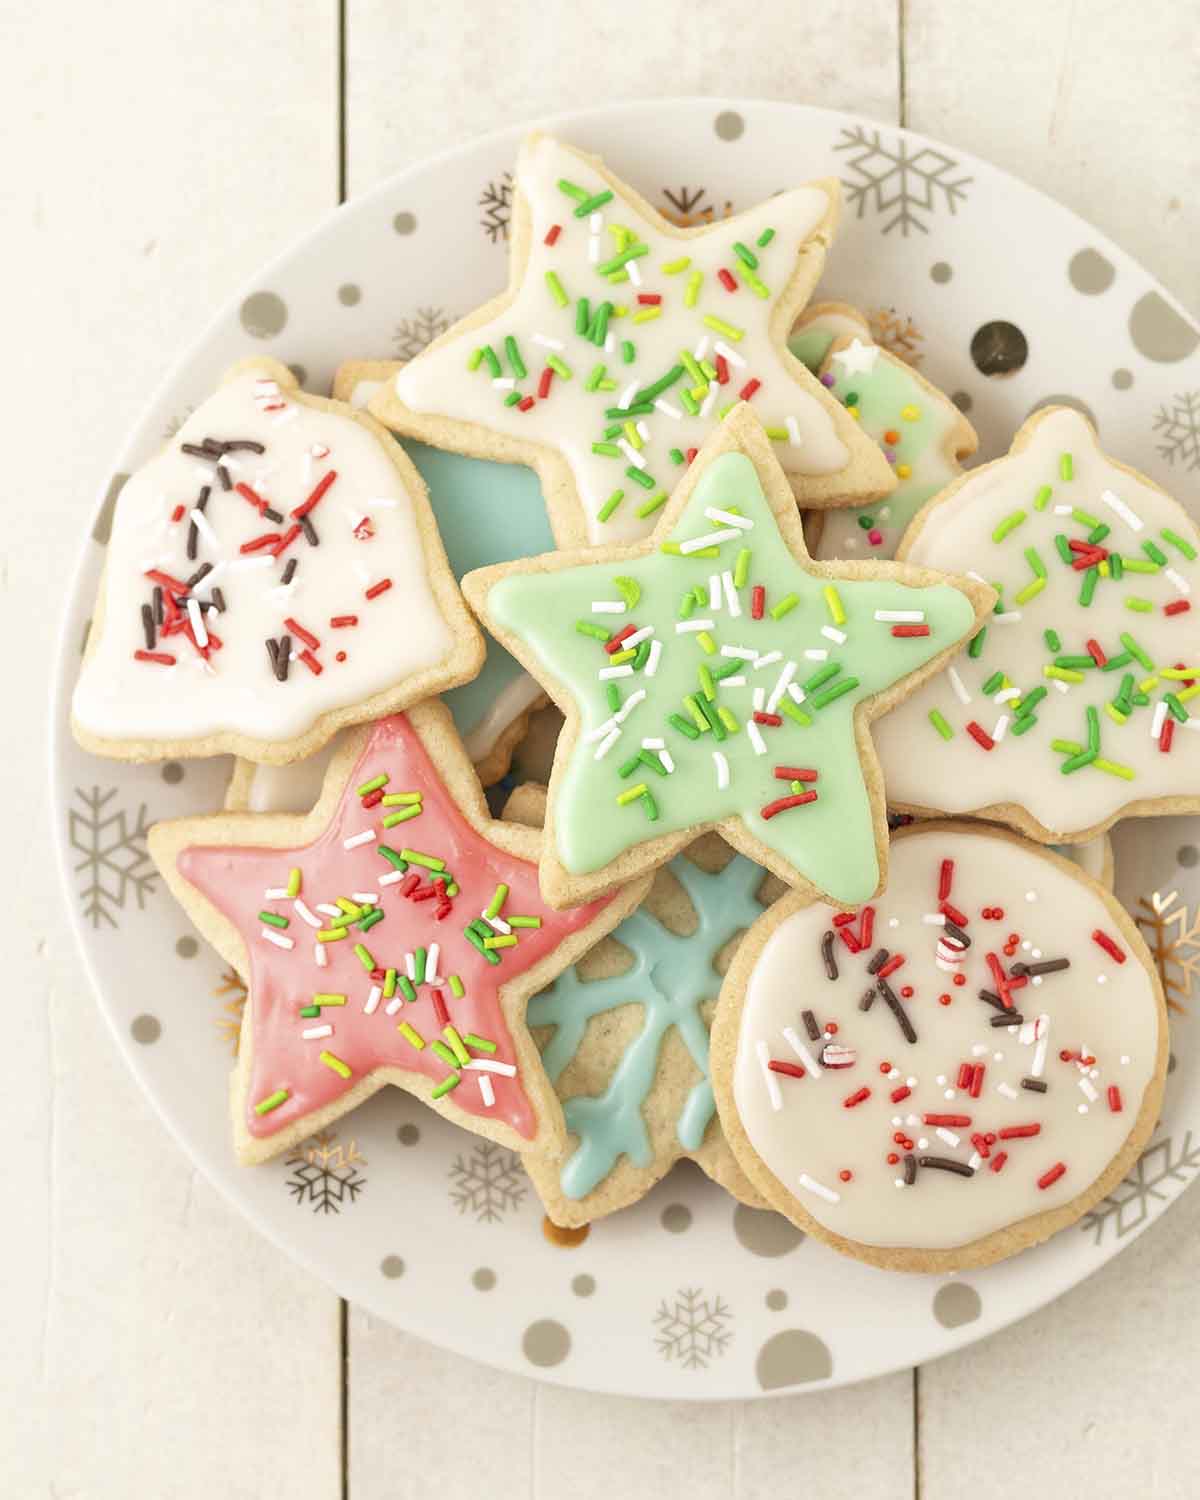 Overhead shot of decorated Christmas gluten free vegan cut out cookies on a plate.